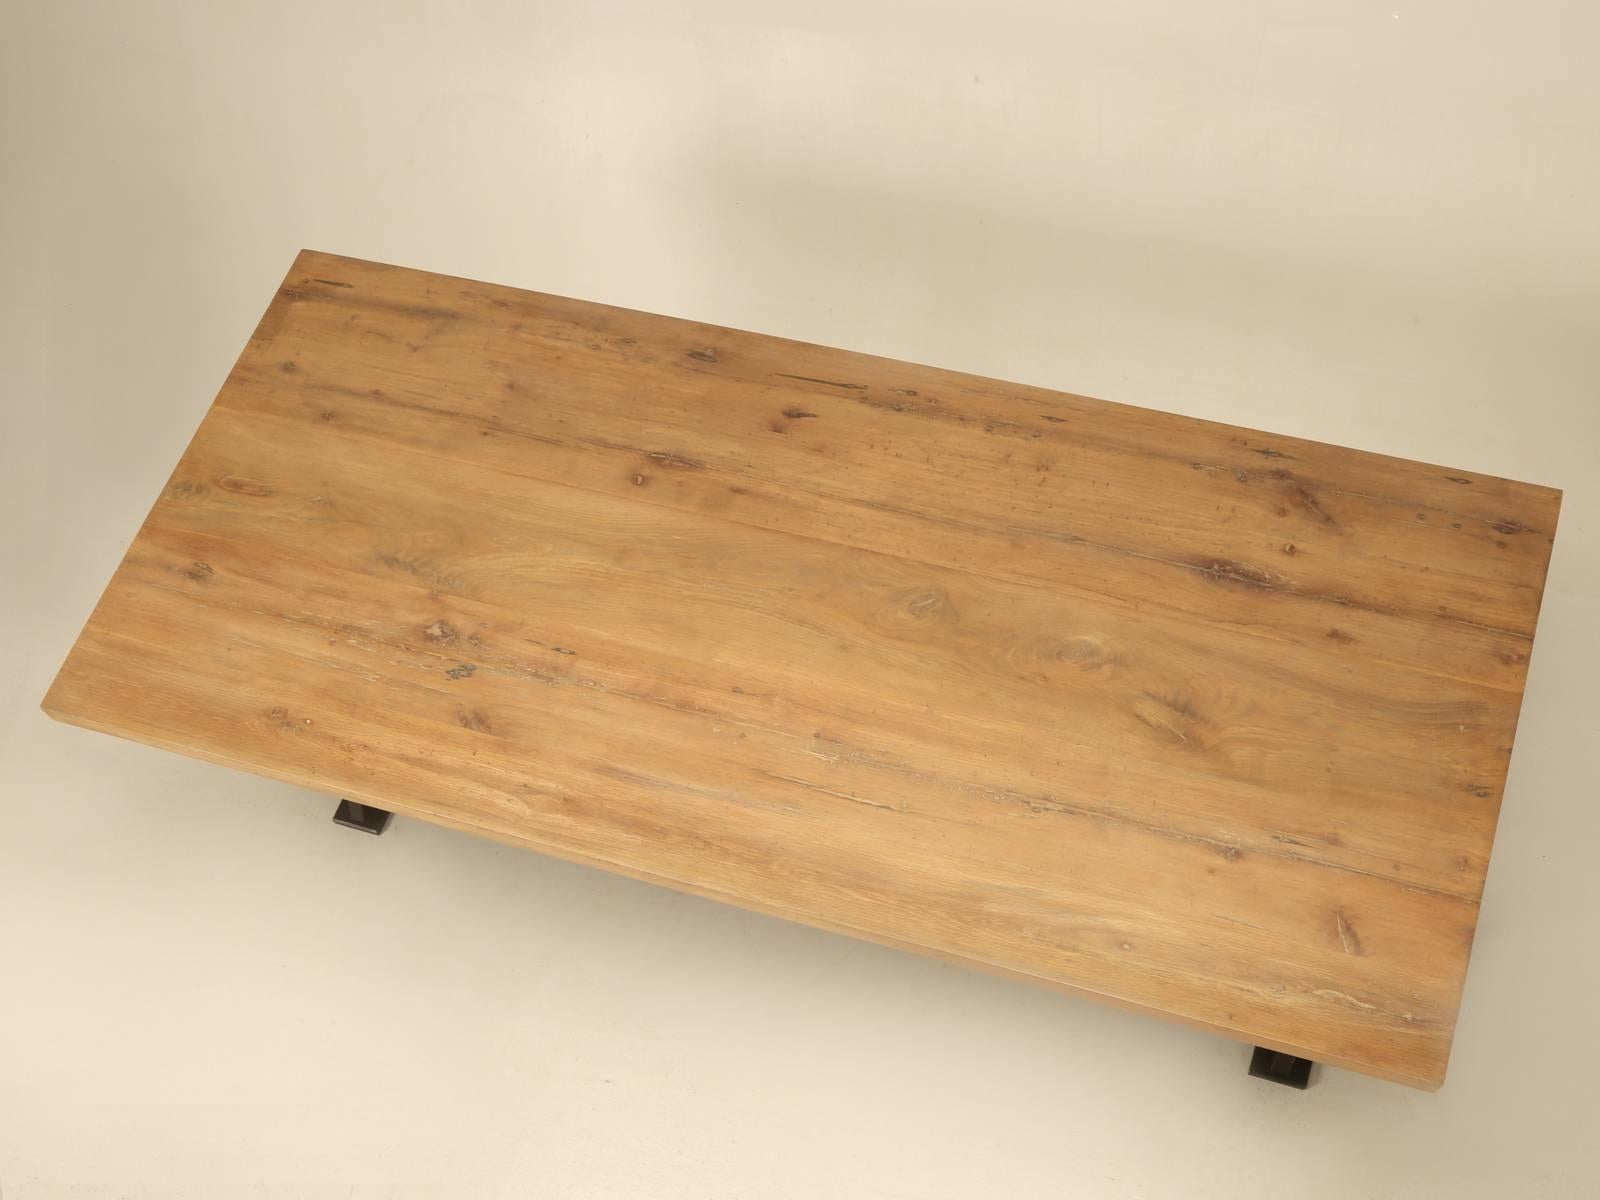 Industrial inspired steel and reclaimed white oak dining or kitchen table, built to your specifications. The table as shown was constructed with reclaimed white oak that we imported from France with a heavy-duty painted steel base. Options are